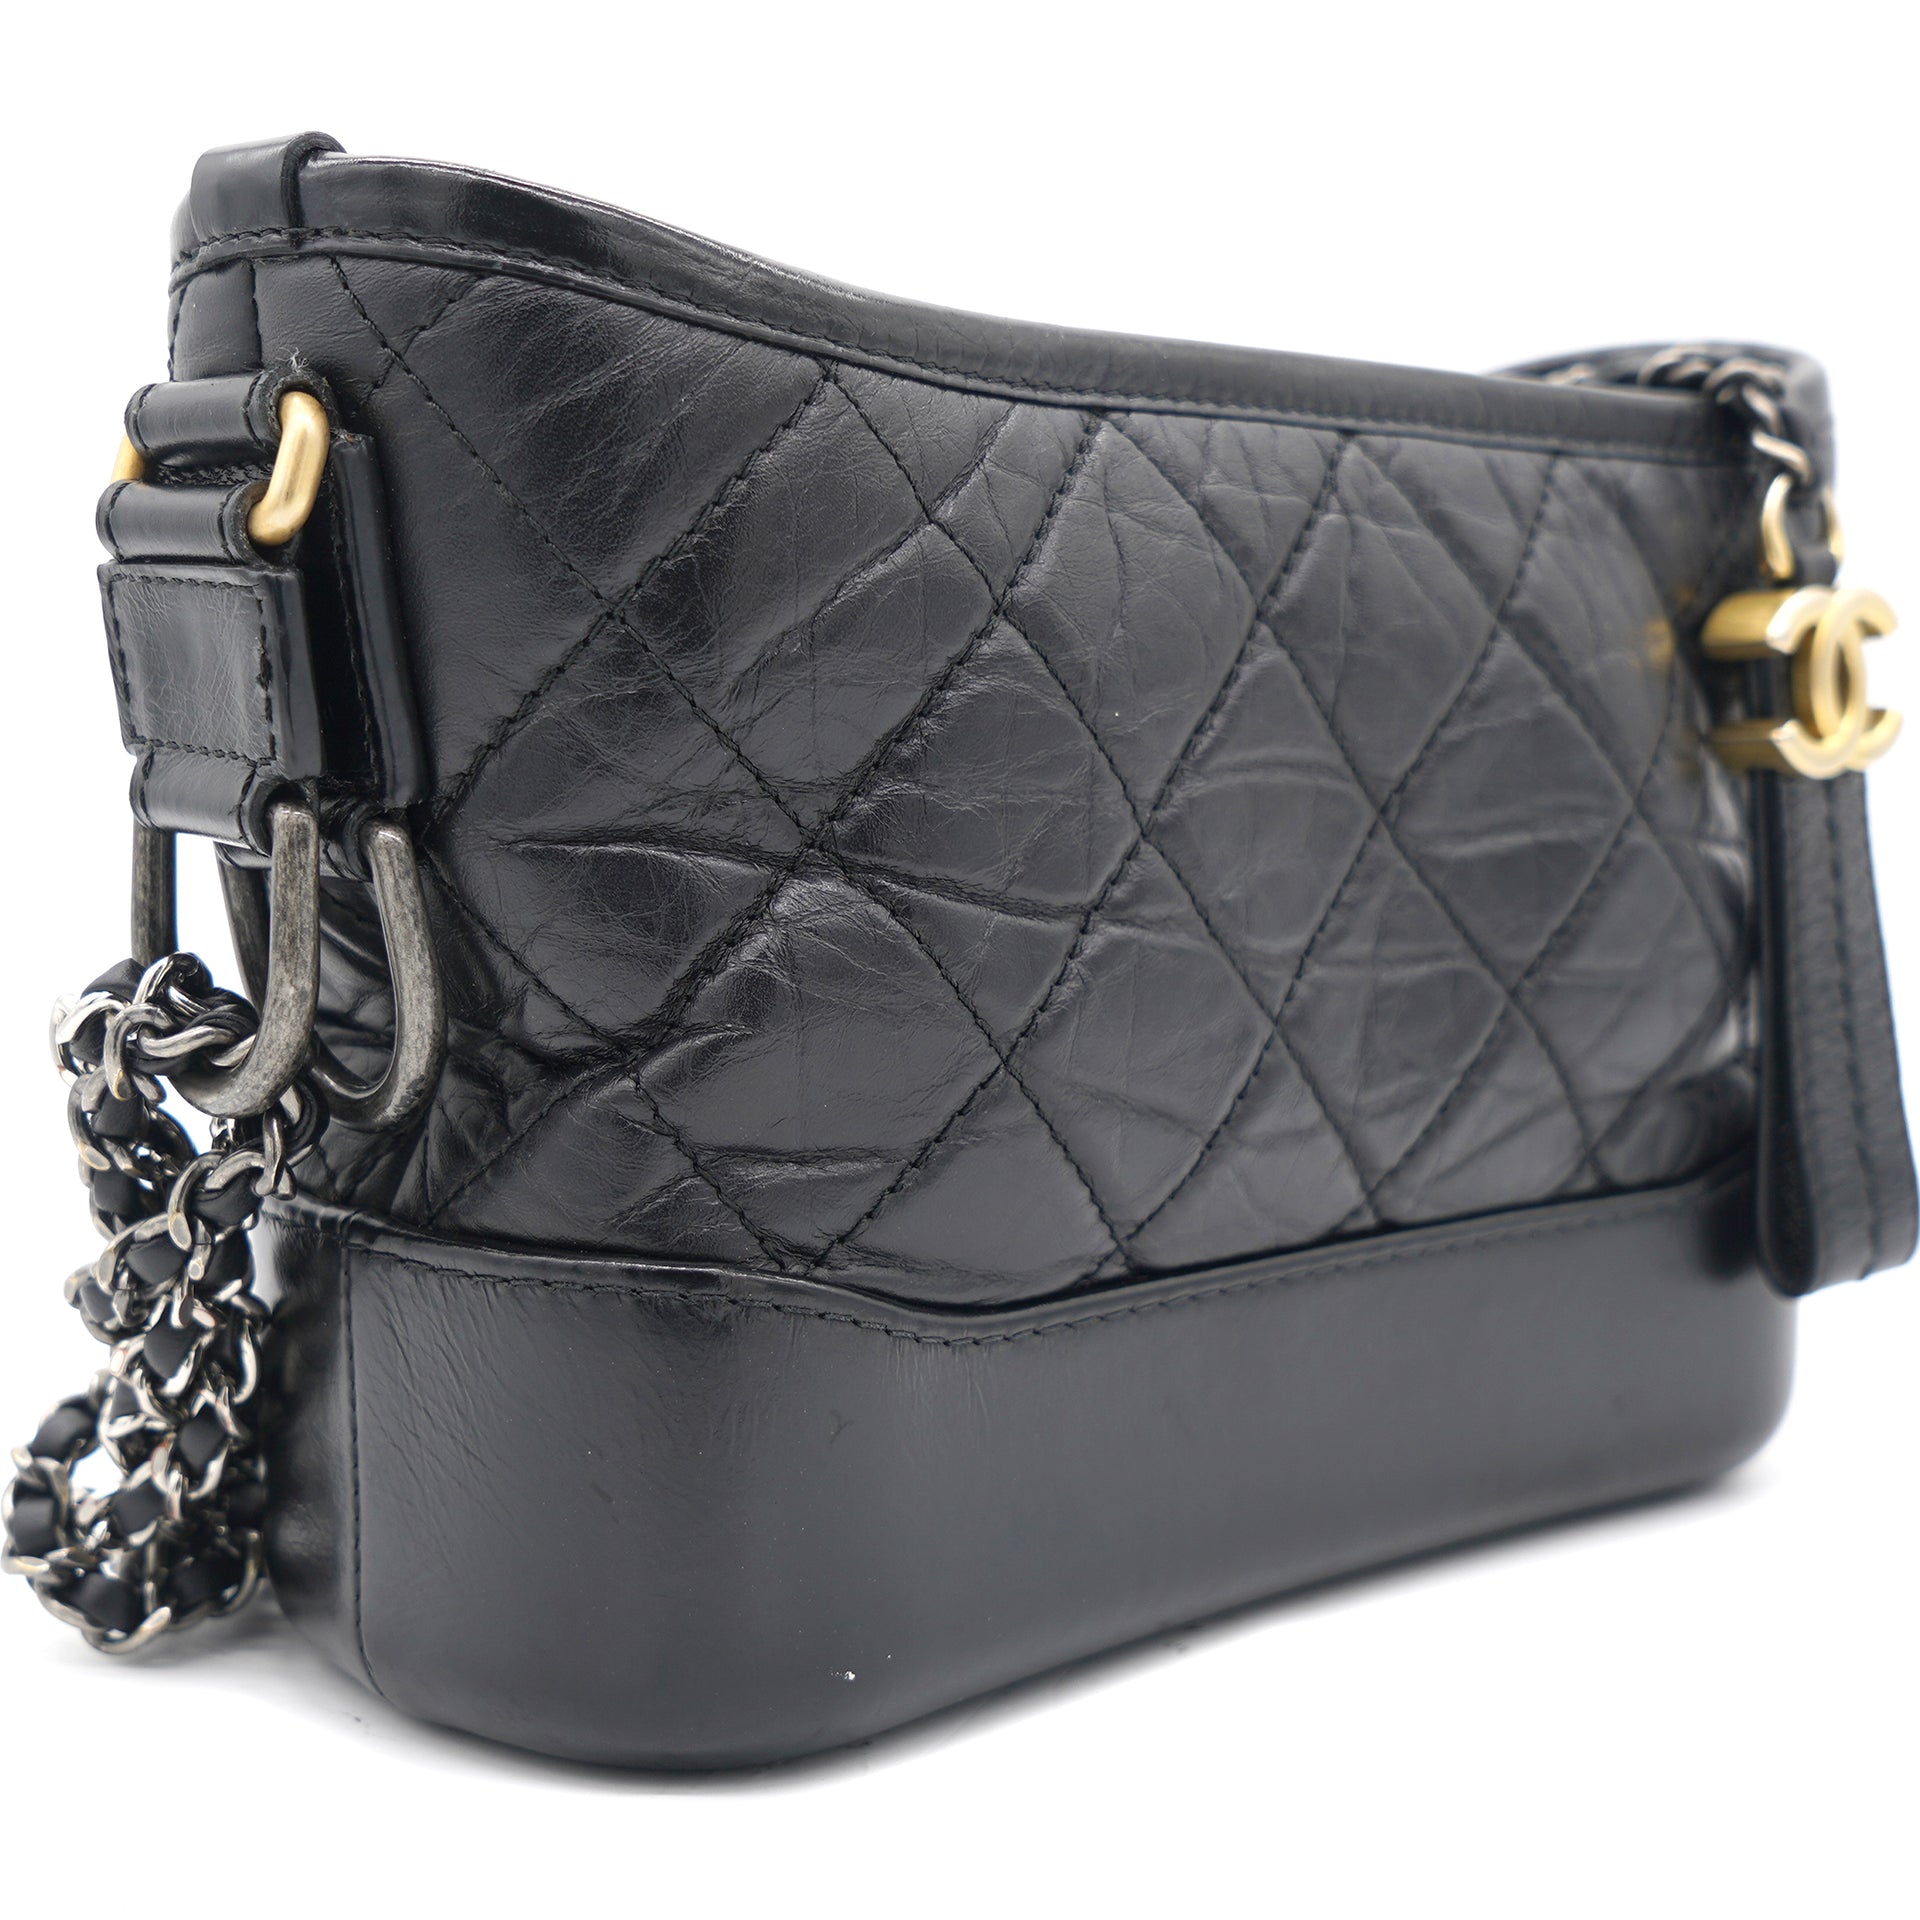 CHANEL Black Aged Calfskin Quilted Small Gabrielle Hobo